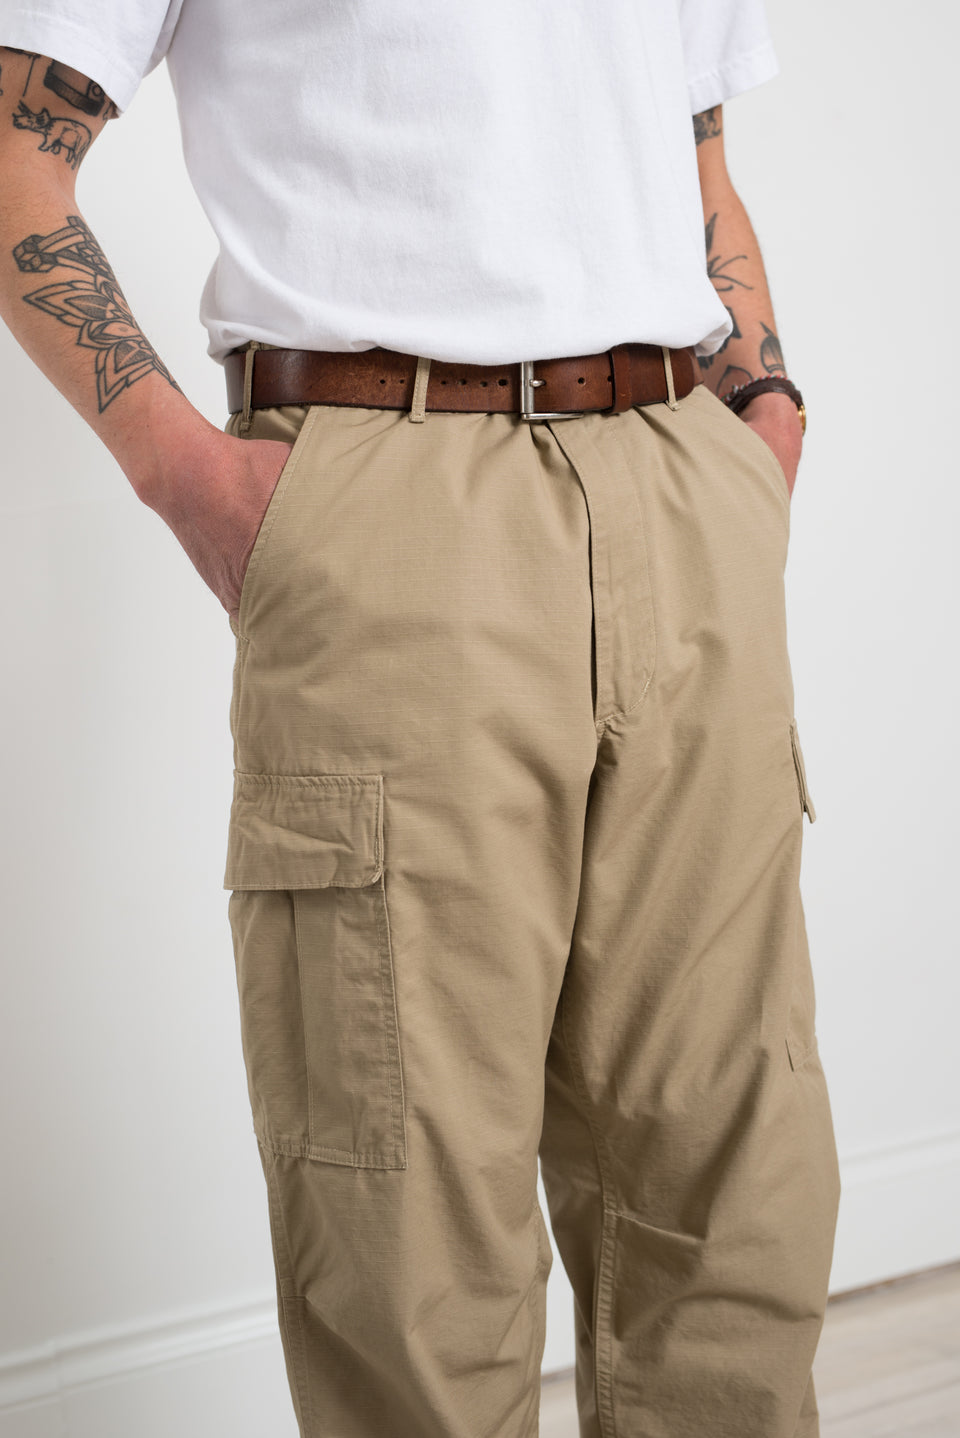 Wholesale Six Pocket Mens Khaki Trousers Cargo Pants With A Lot Of Pockets